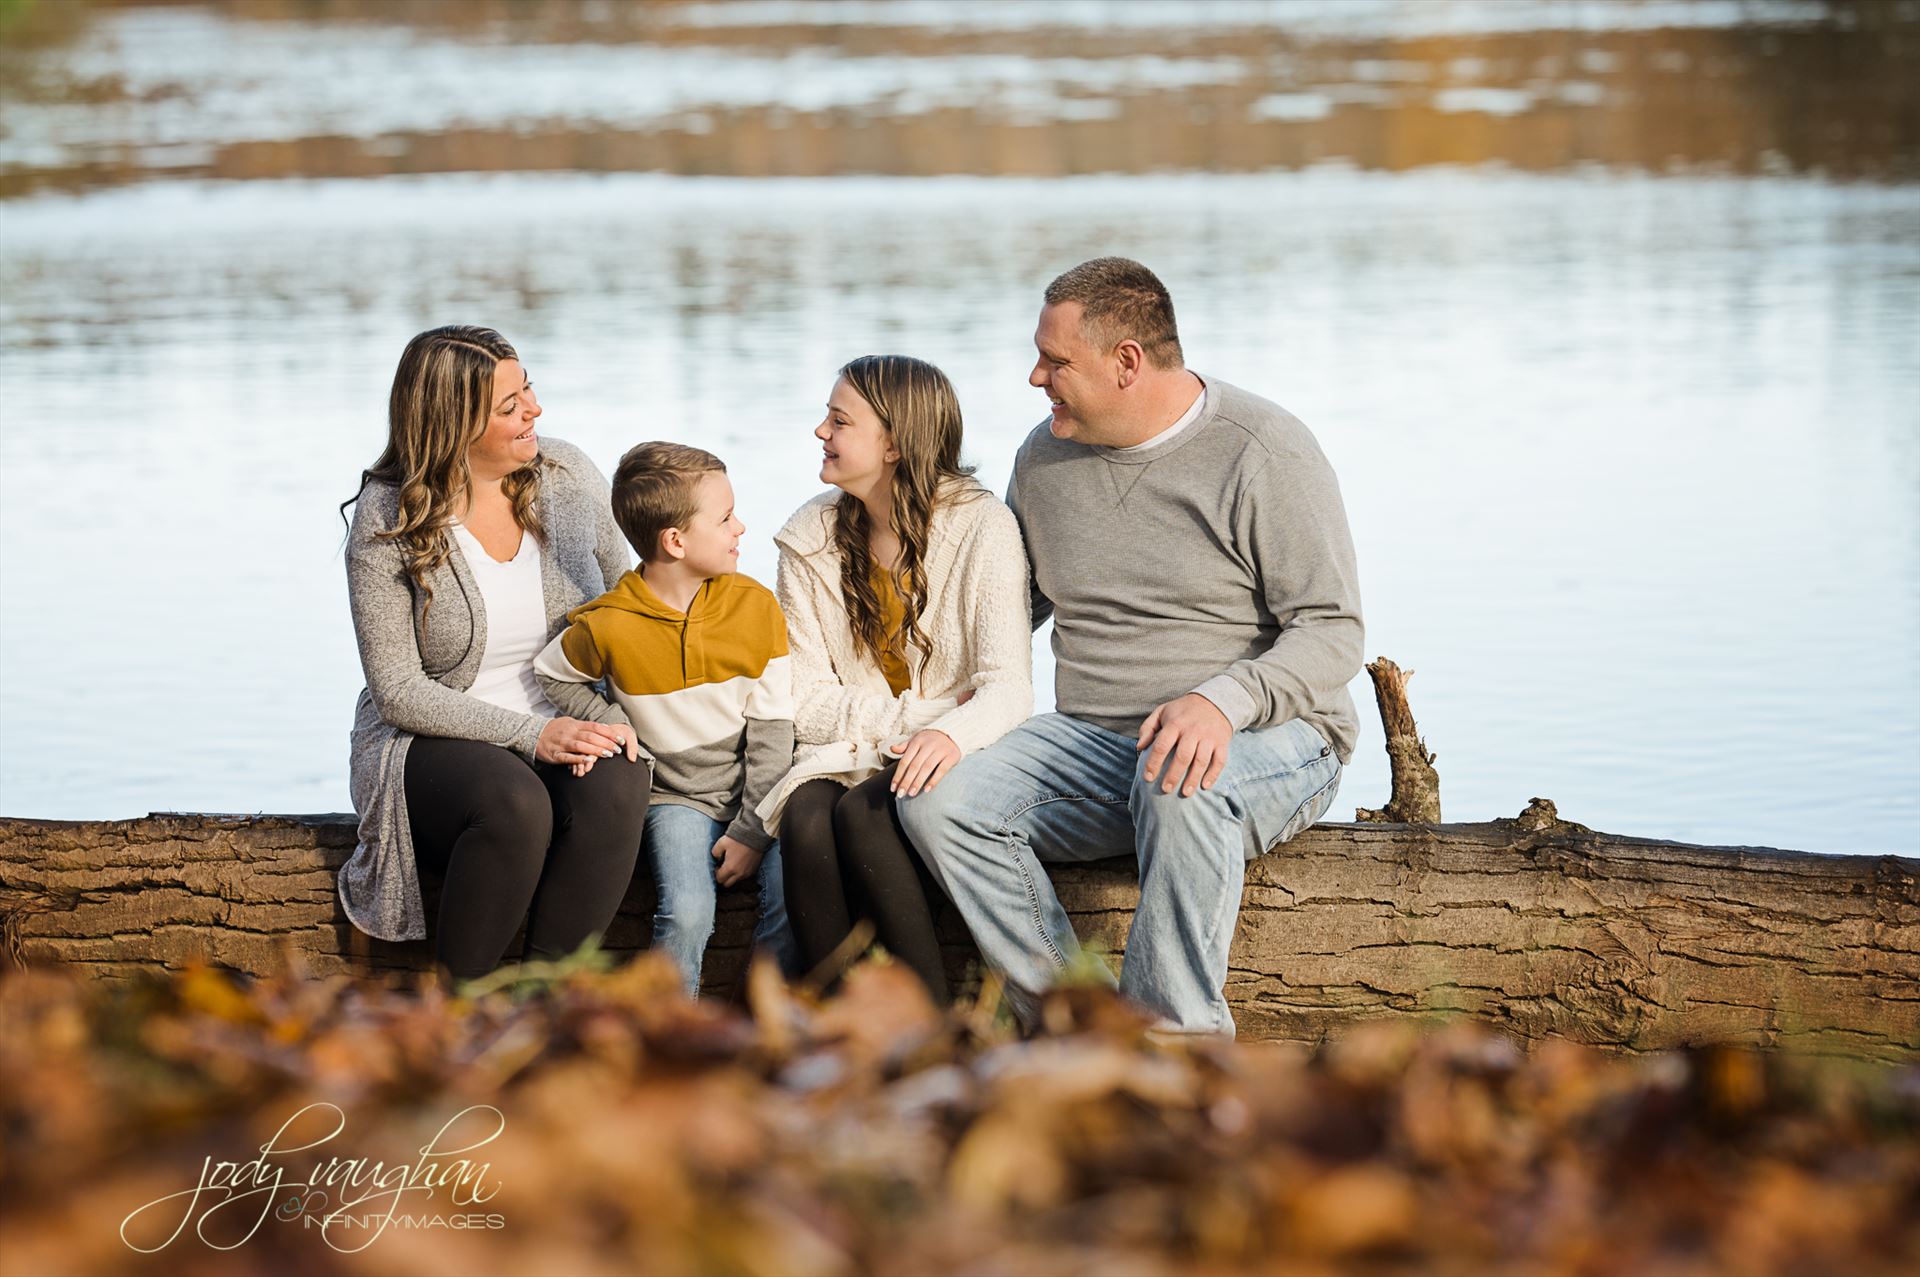 family 14  by Jody Vaughan Infinity Images